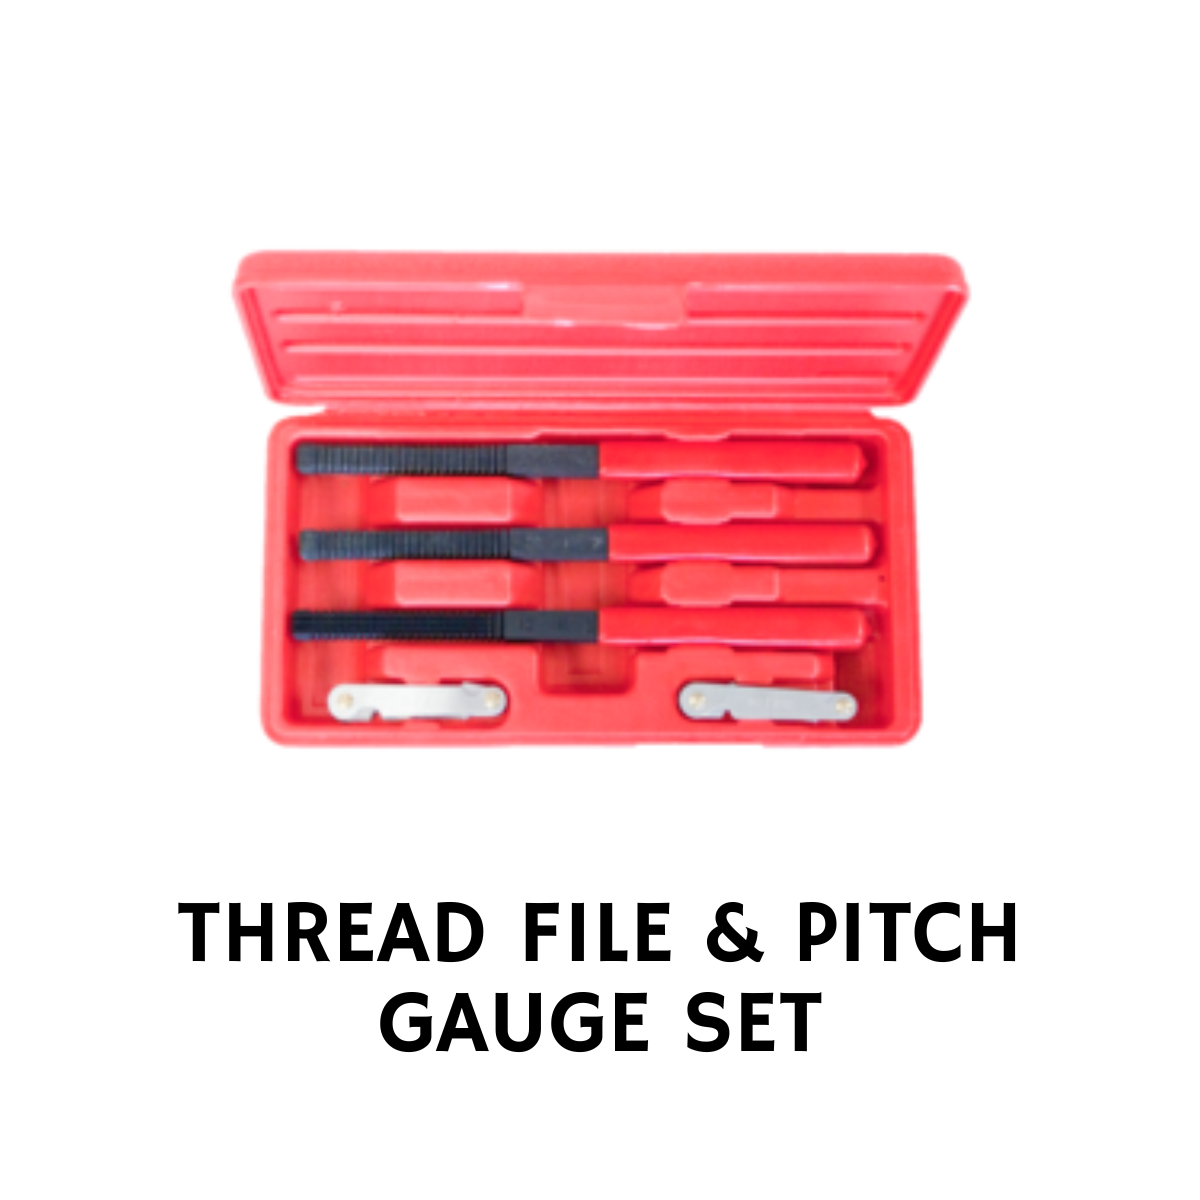 THREAD FILE AND PITCH GAUGE SET